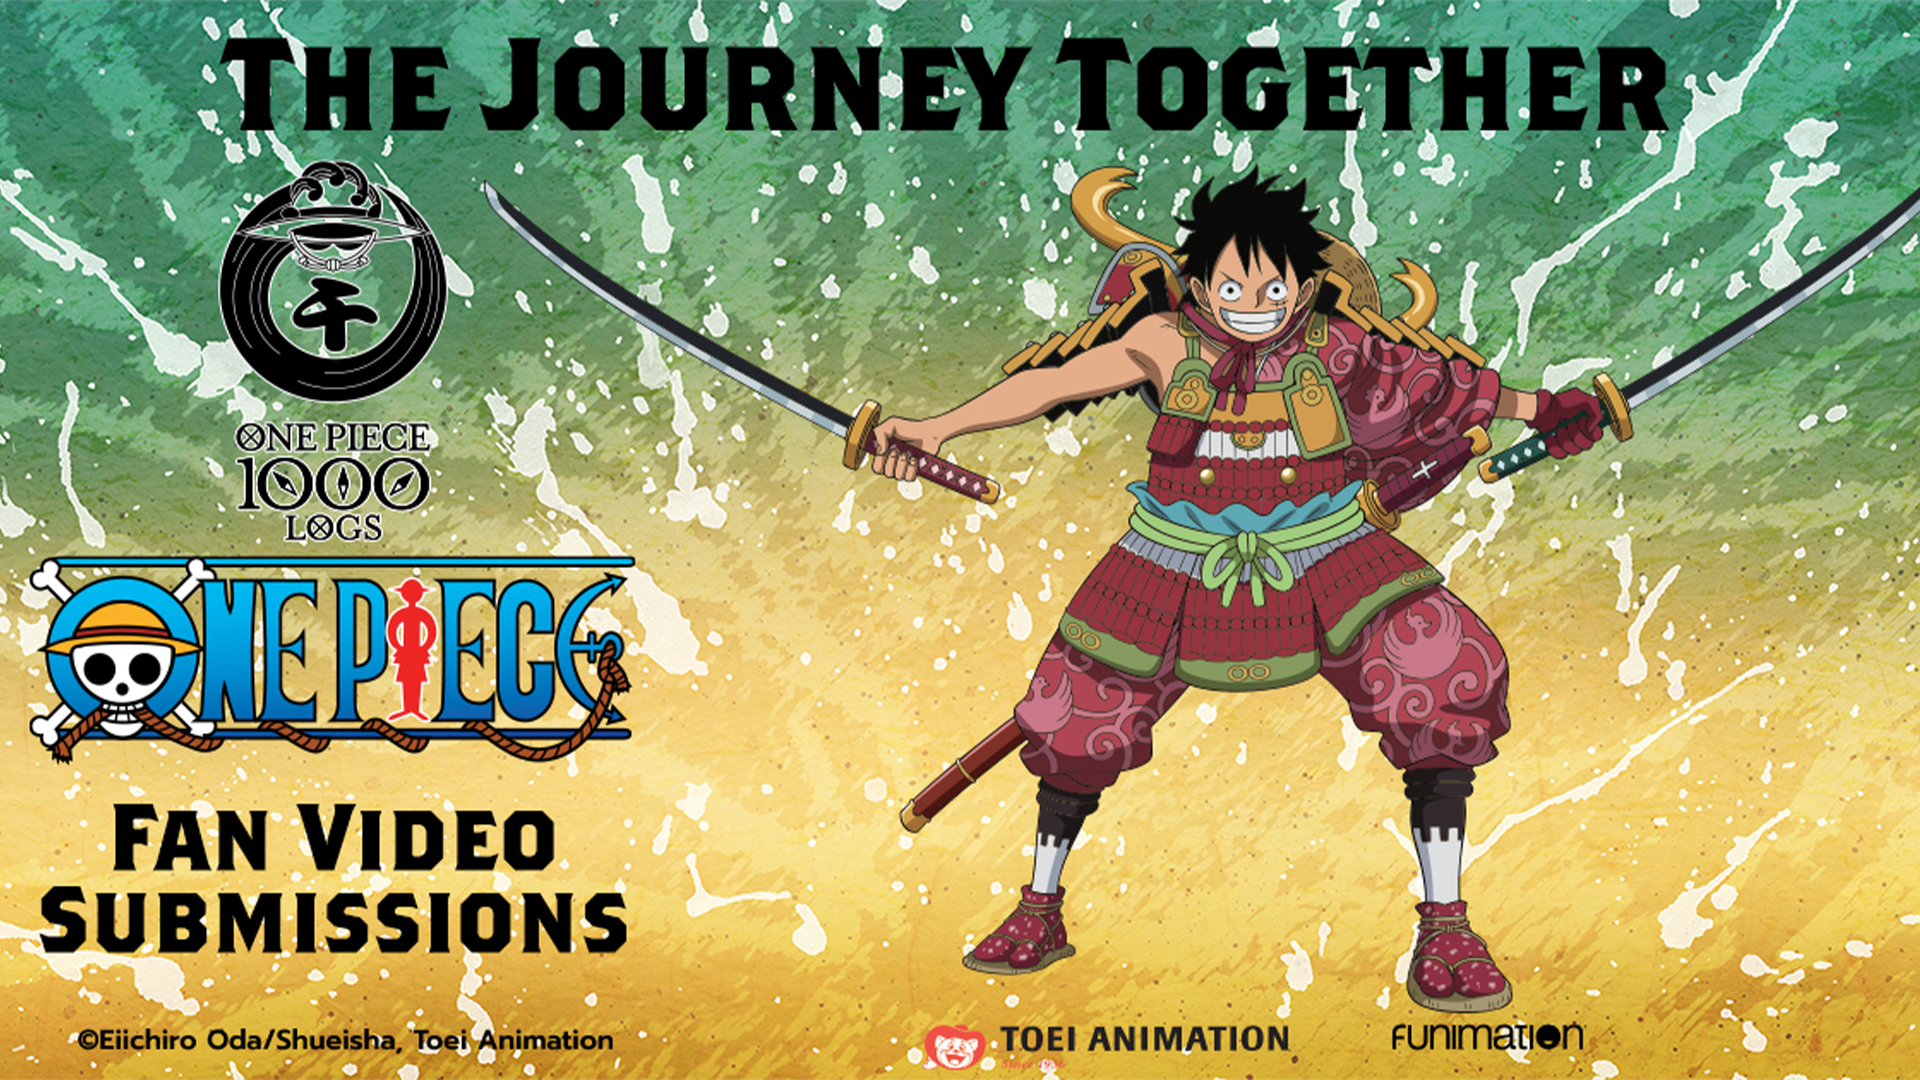 One Piece - Episode 1034 - Luffy, Defeated! The Straw Hats in Jeopardy?!,  is now available to stream via @crunchyroll. Follow…